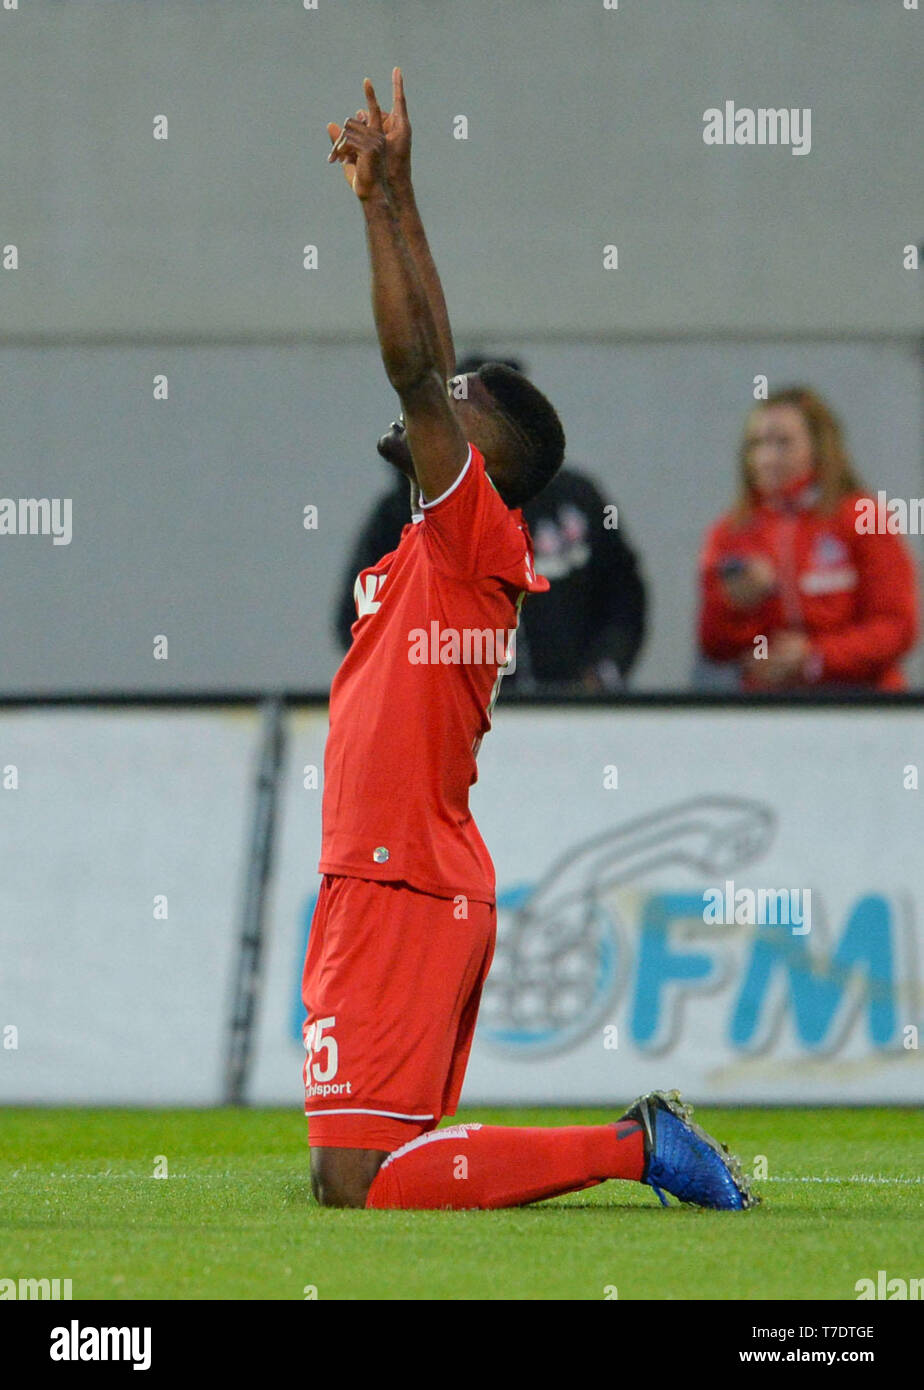 dpatop - 06 May 2019, Bavaria, Fürth: Soccer: 2nd Bundesliga, SpVgg Greuther Fürth - 1st FC Cologne, 32nd matchday at the Sportpark Ronhof Thomas Sommer. Cologne's Jhon Cordoba celebrates his goal to 0:1. IMPORTANT NOTE: In accordance with the requirements of the DFL Deutsche Fußball Liga and the DFB Deutscher Fußball-Bund, it is prohibited to use or have used photos taken in the stadium and/or the match in the form of sequence pictures and/or video-like photo sequences. Photo: Timm Schamberger/dpa Stock Photo